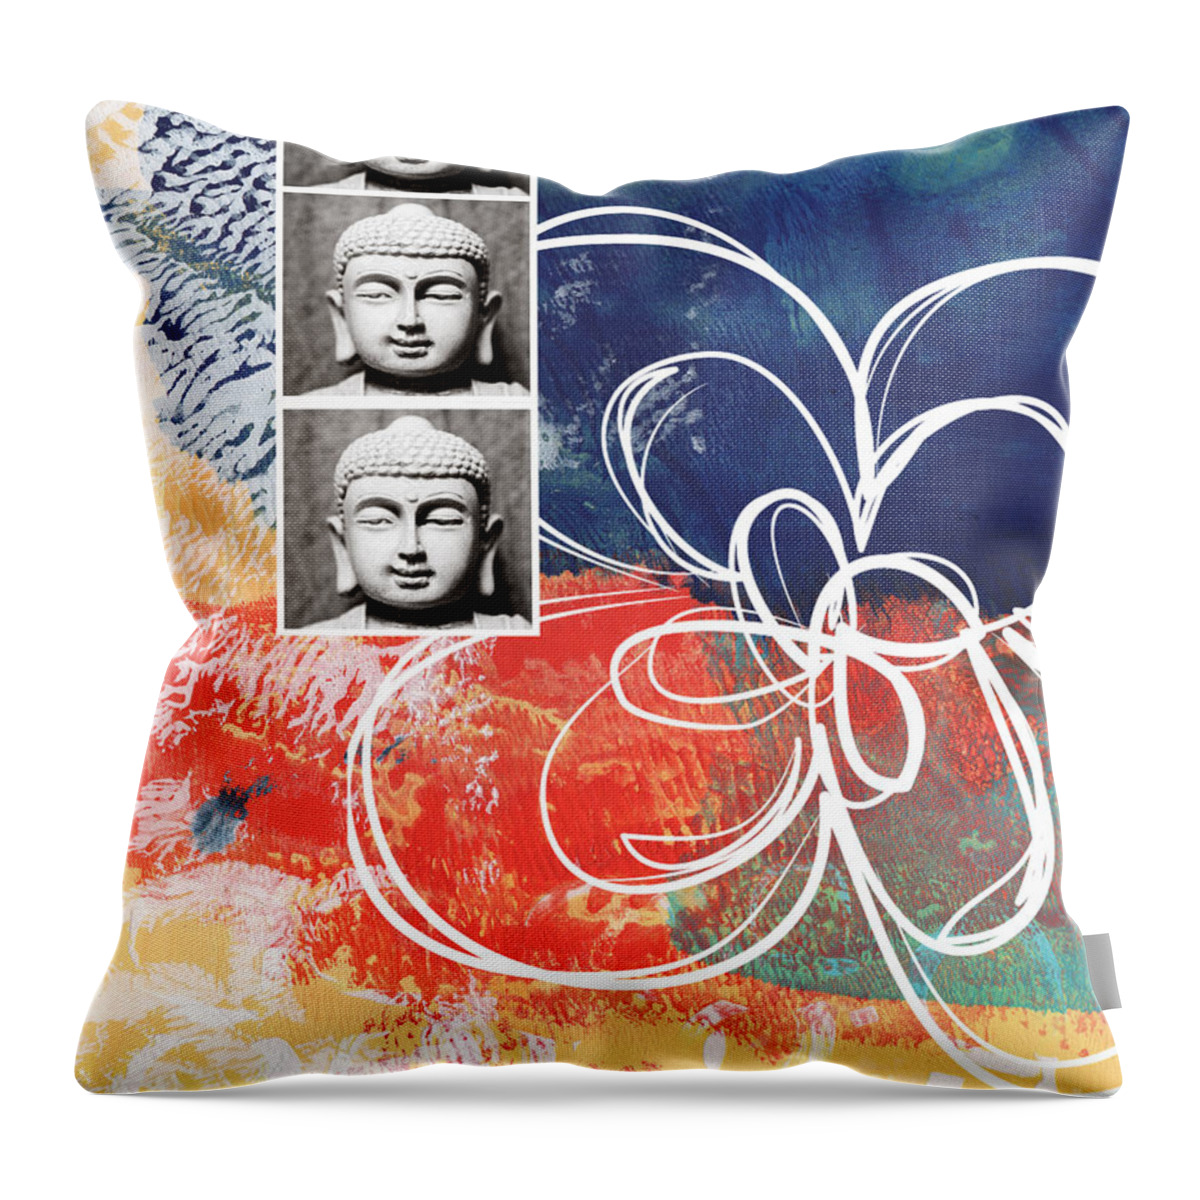 Buddha Throw Pillow featuring the mixed media Abstract Buddha by Linda Woods